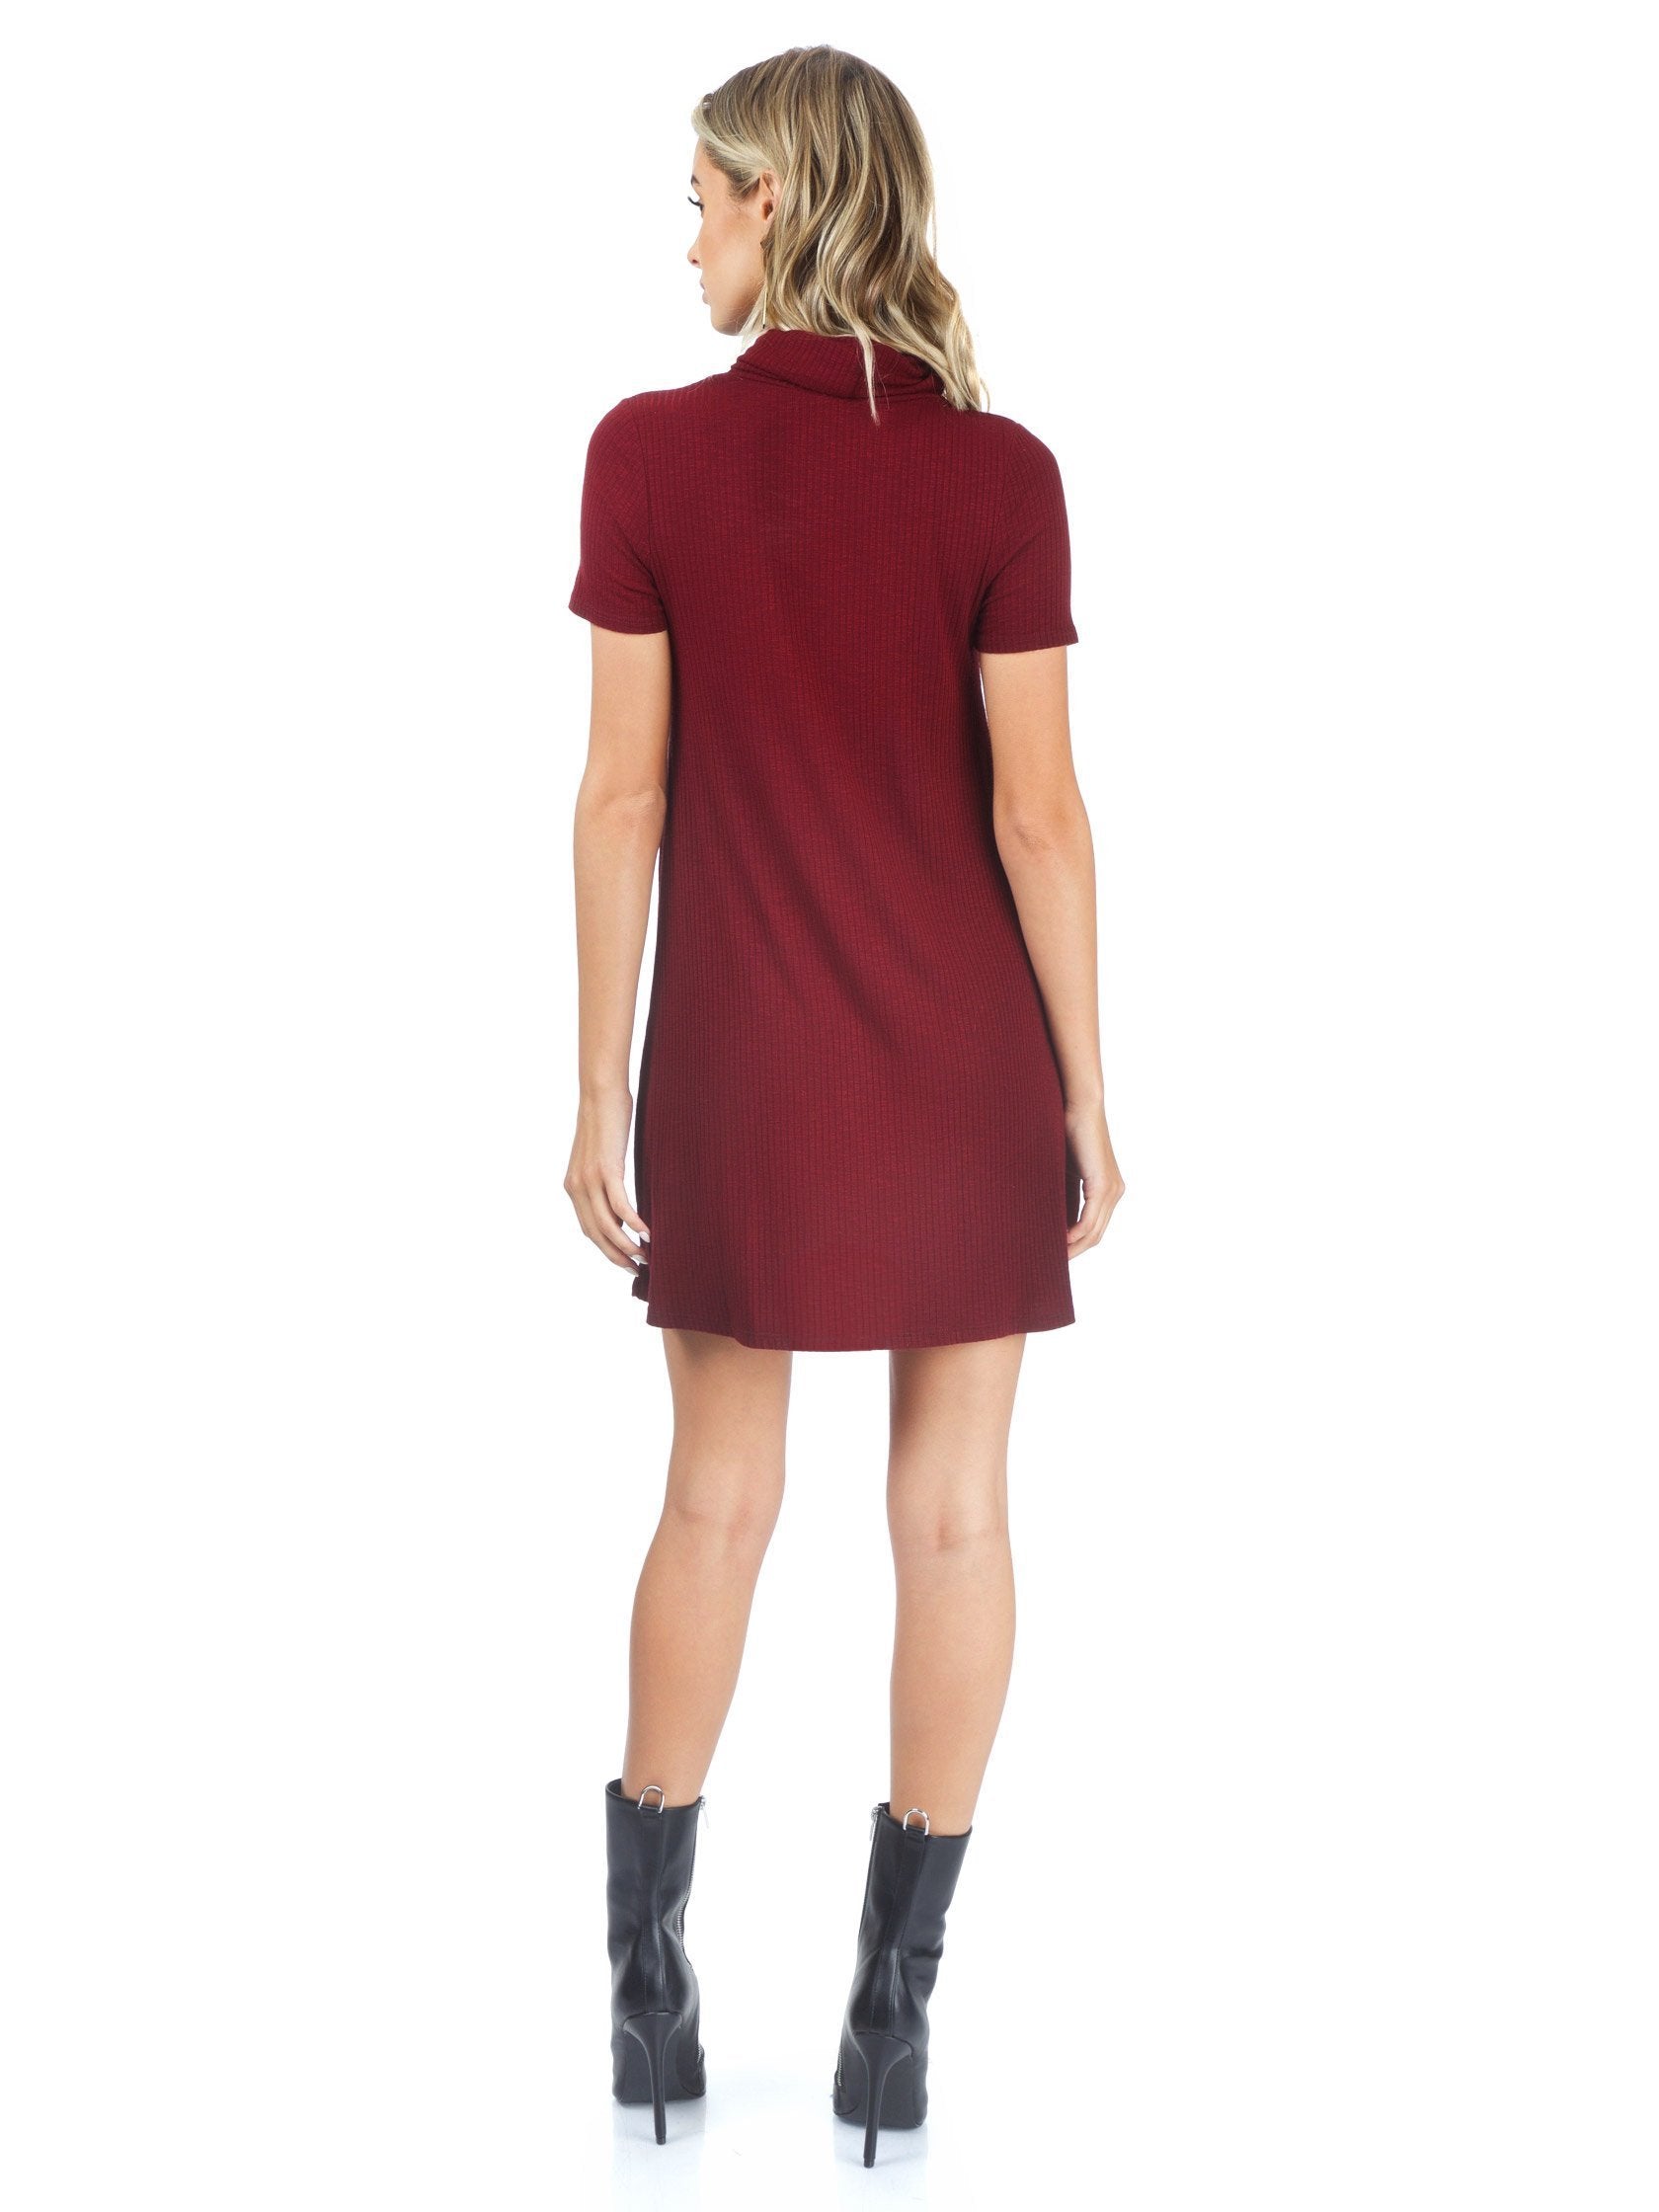 Women wearing a dress rental from AQUA called Ribbed Knit Neck Cowl Dress